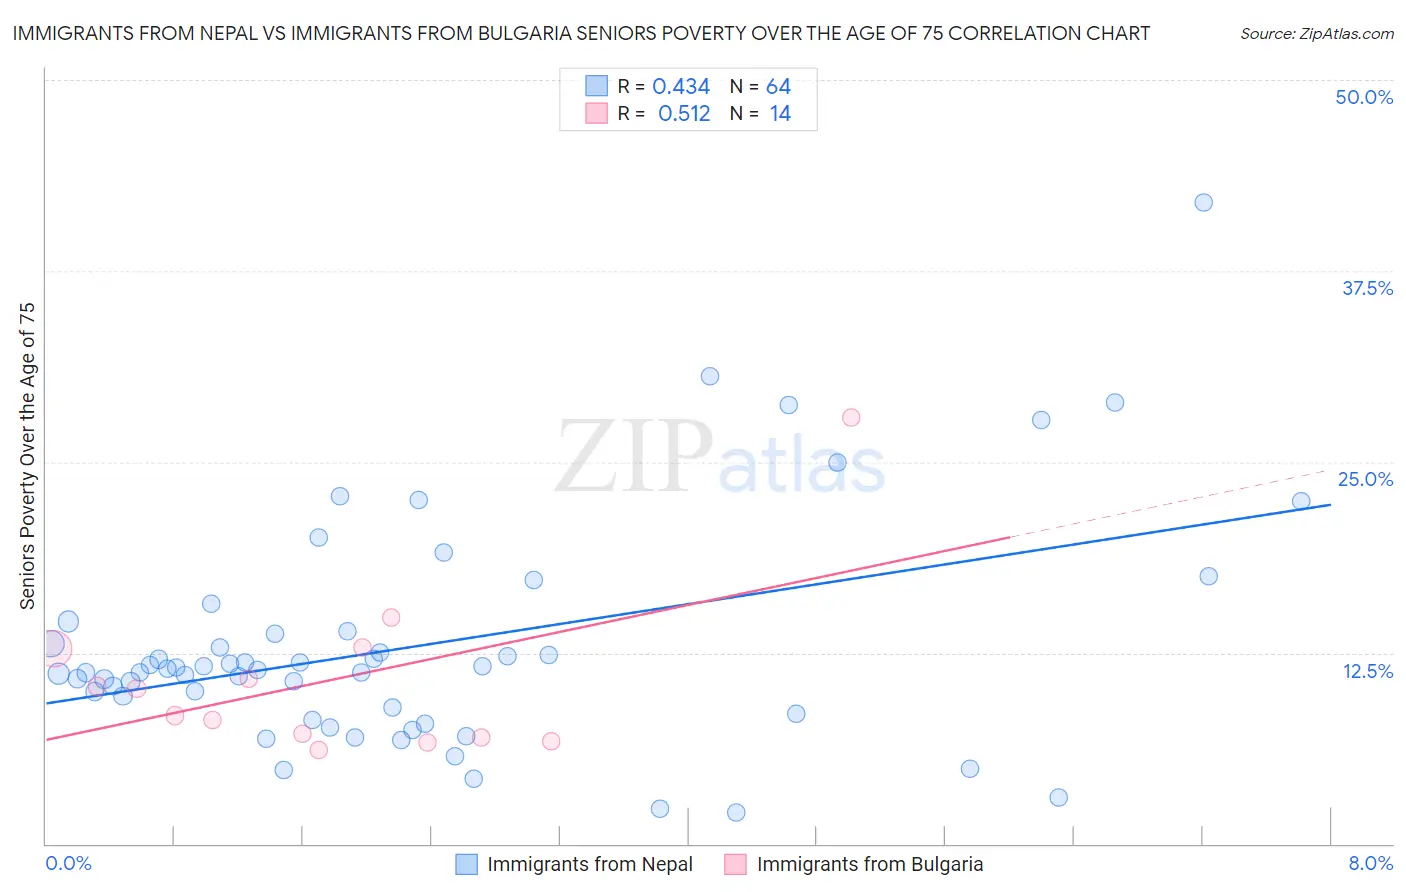 Immigrants from Nepal vs Immigrants from Bulgaria Seniors Poverty Over the Age of 75